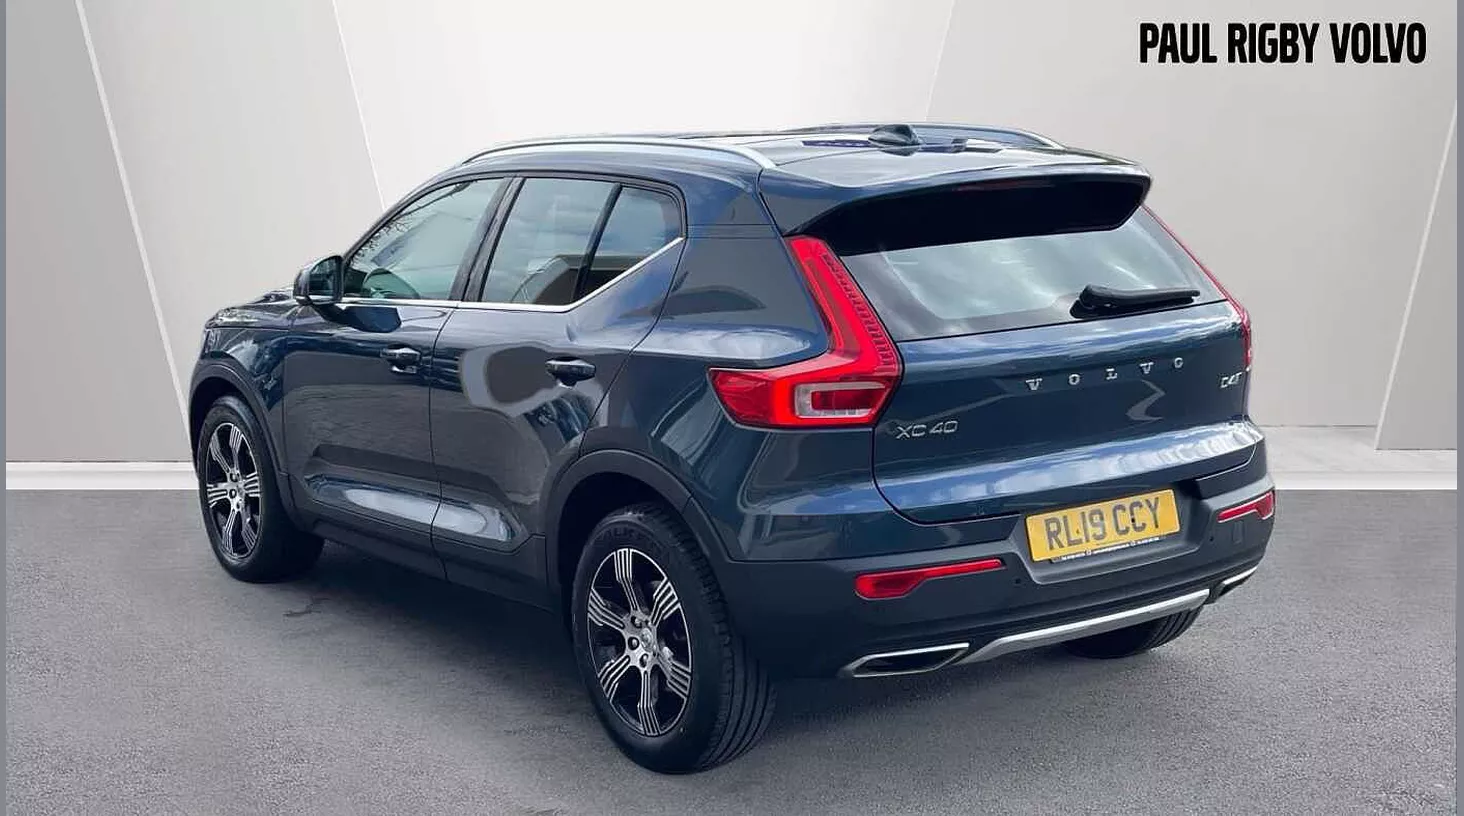 Volvo XC40 2.0 D4 [190] Inscription 5dr AWD Geartronic